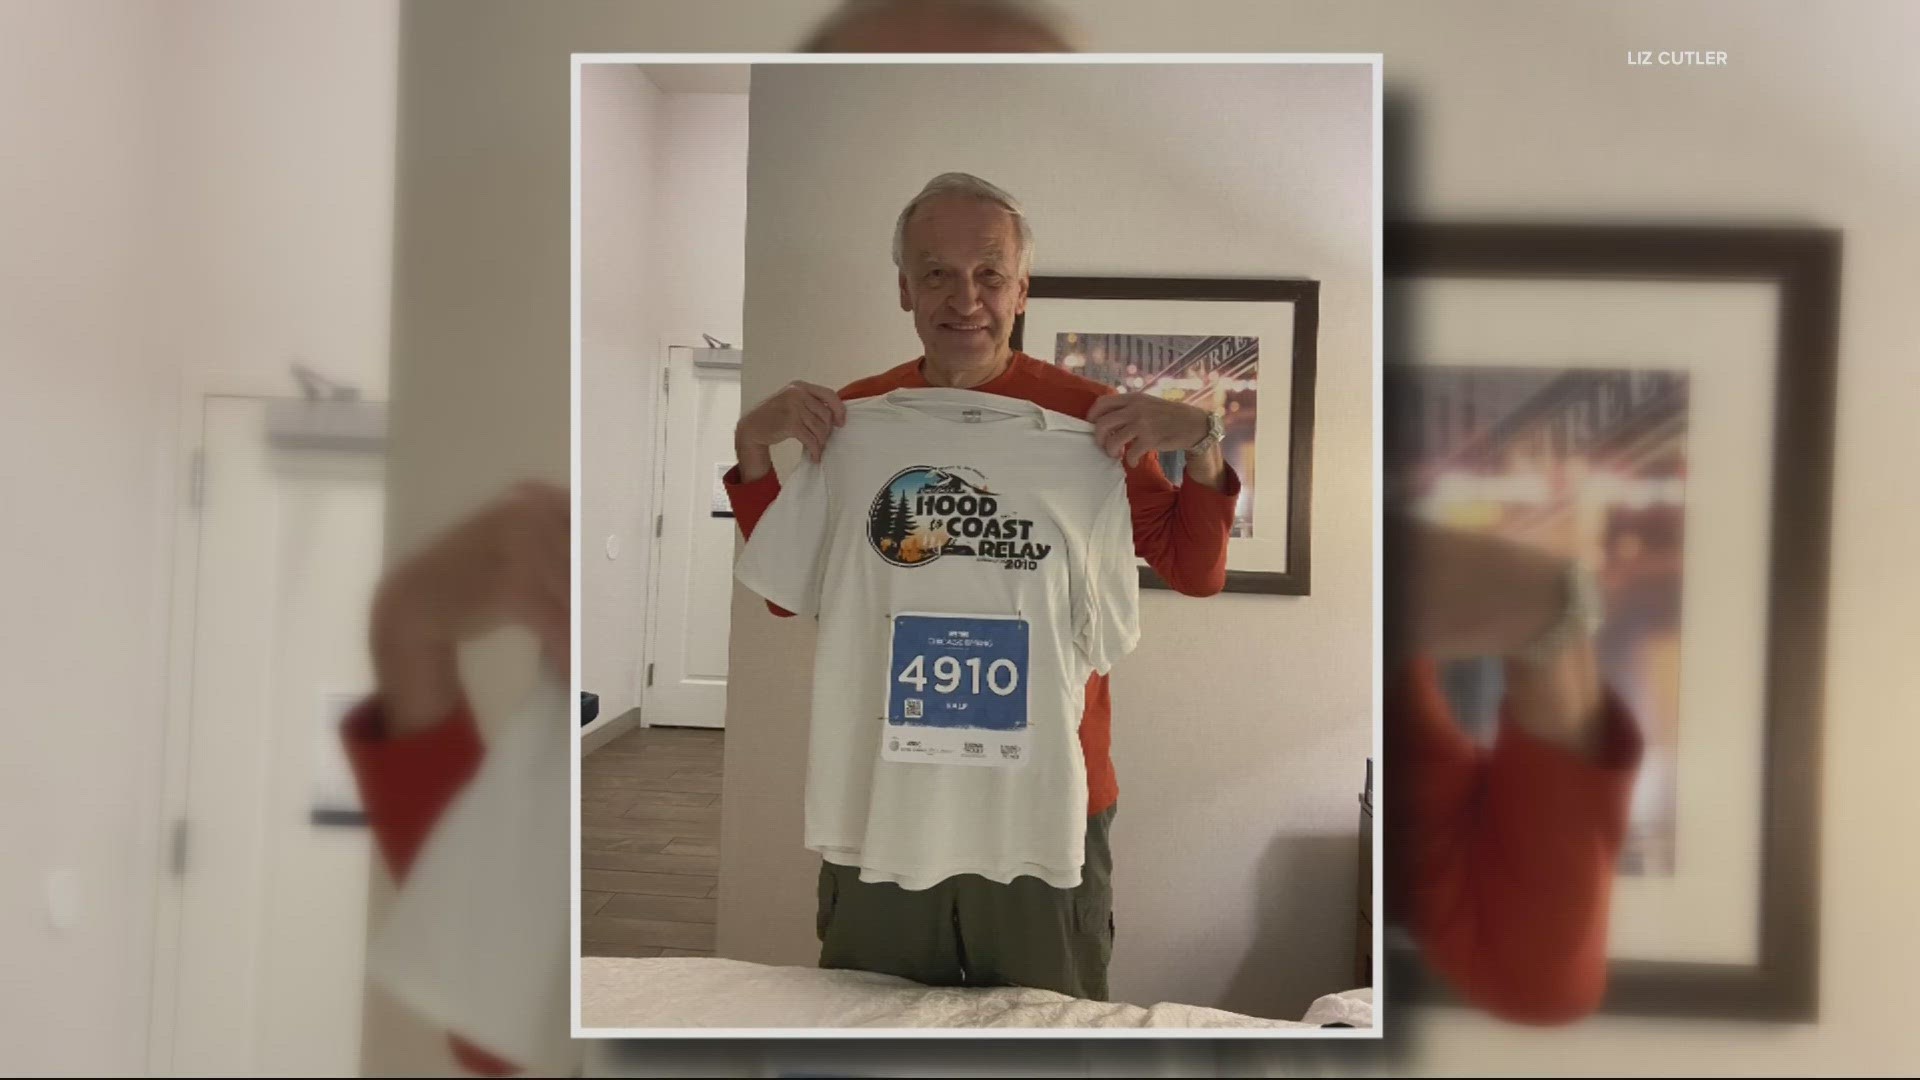 COVID-19, brain cancer, and two decades later, 73-year-old Jerry Korson completed his goal or running a half marathon in every state.